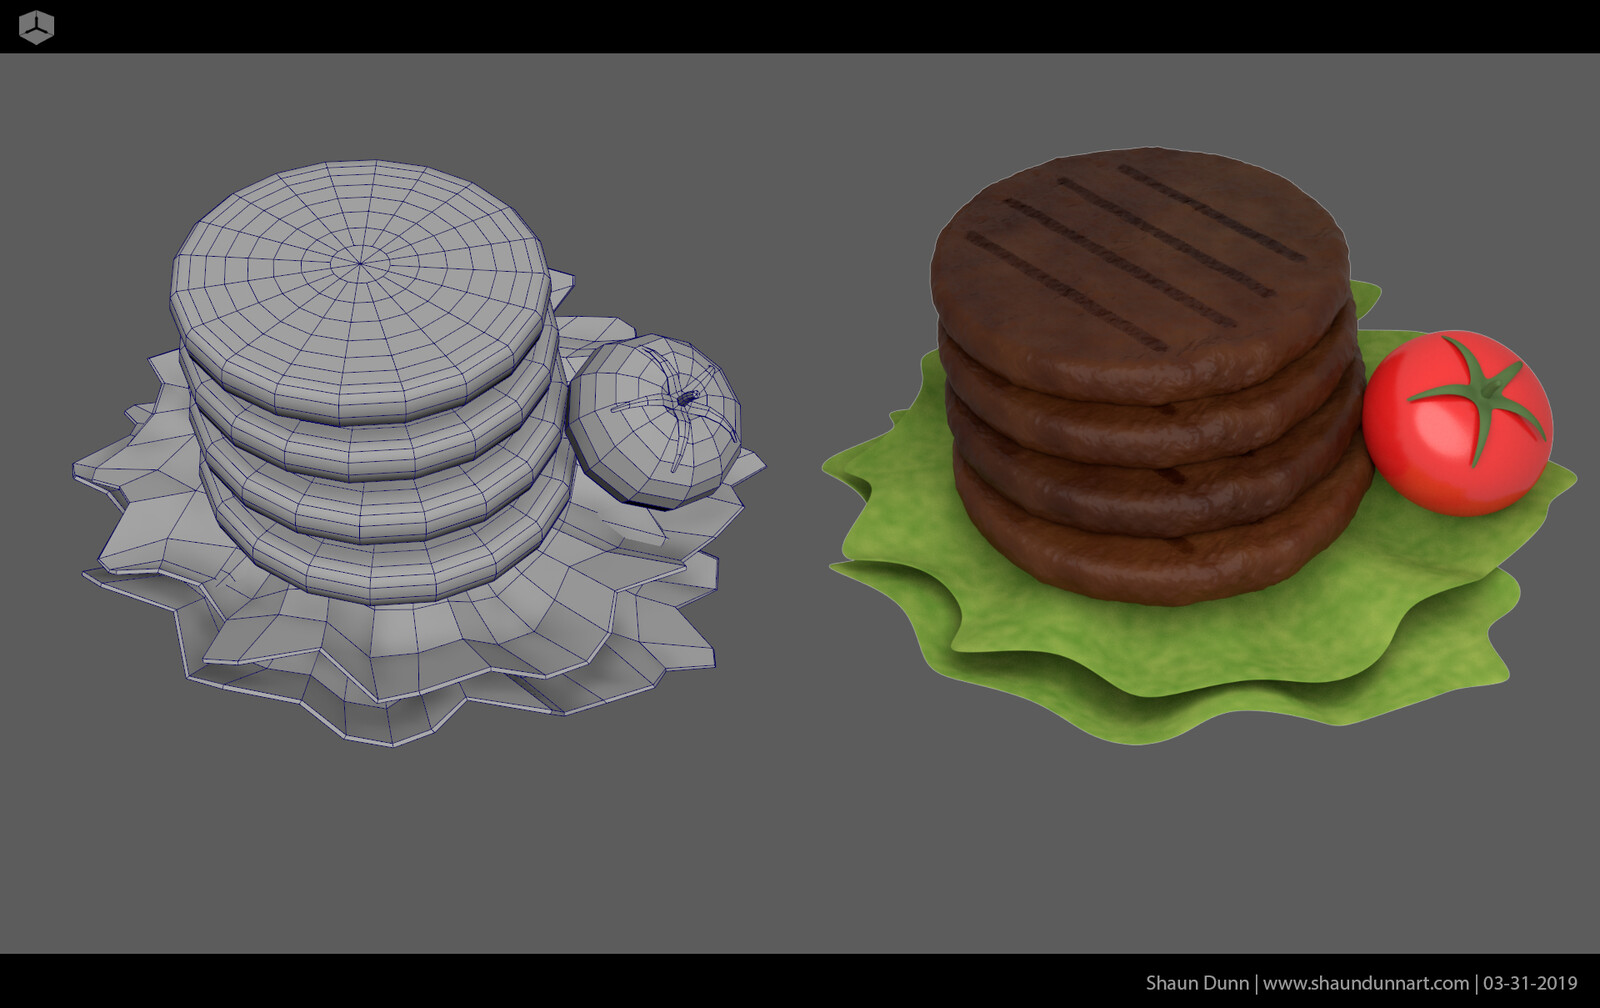 I created stylized canned 3D burger patties so I could project the rendered image on one of my canned goods.